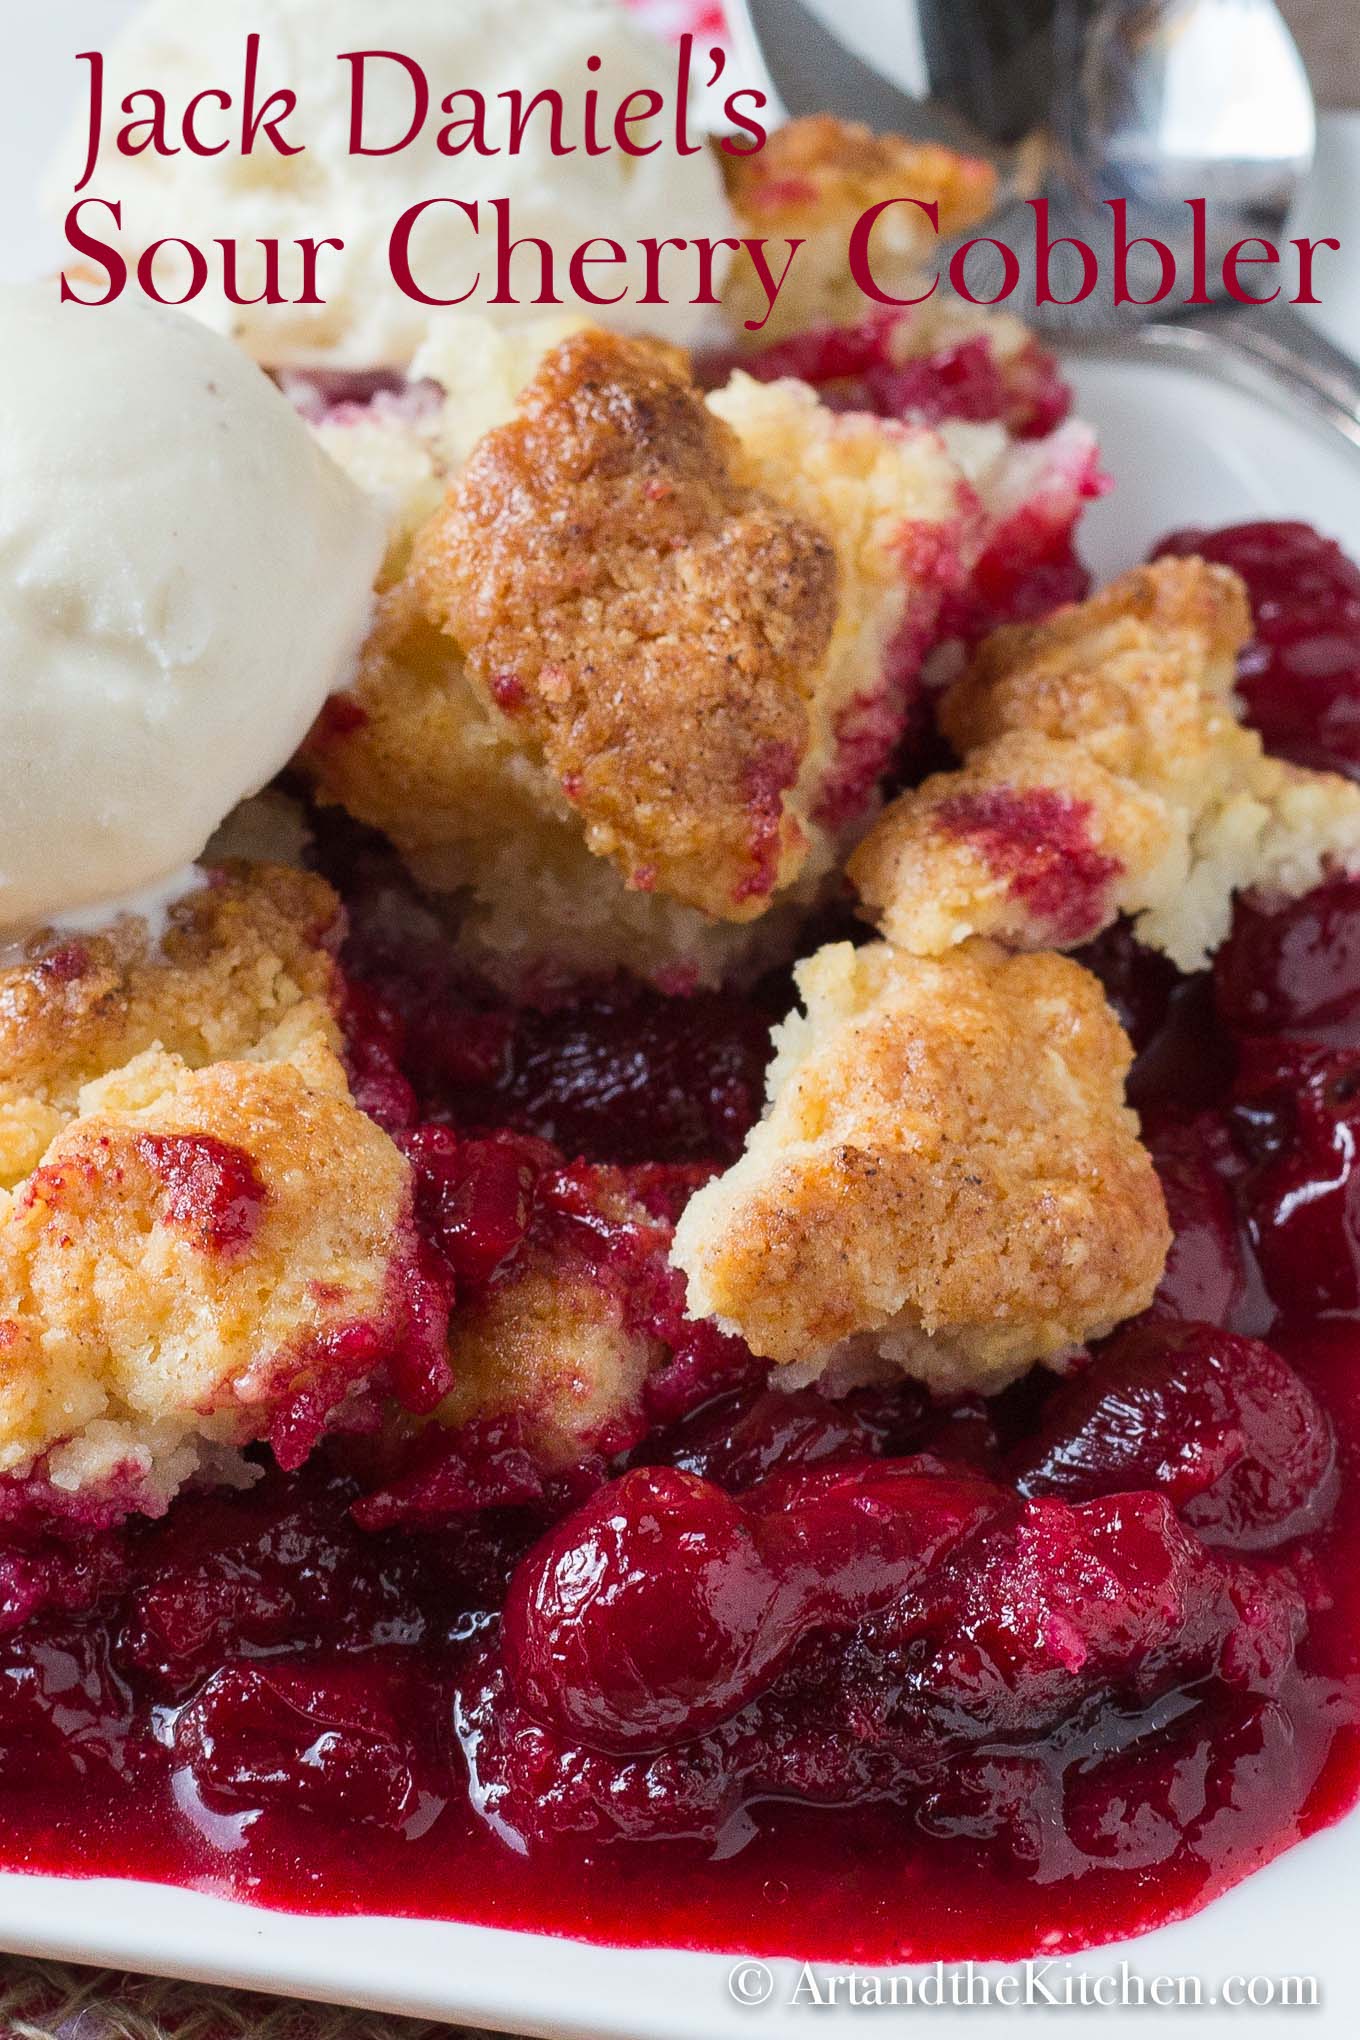 Delicious cobbler made with sour cherries infused with Jack Daniel's. via @artandthekitch